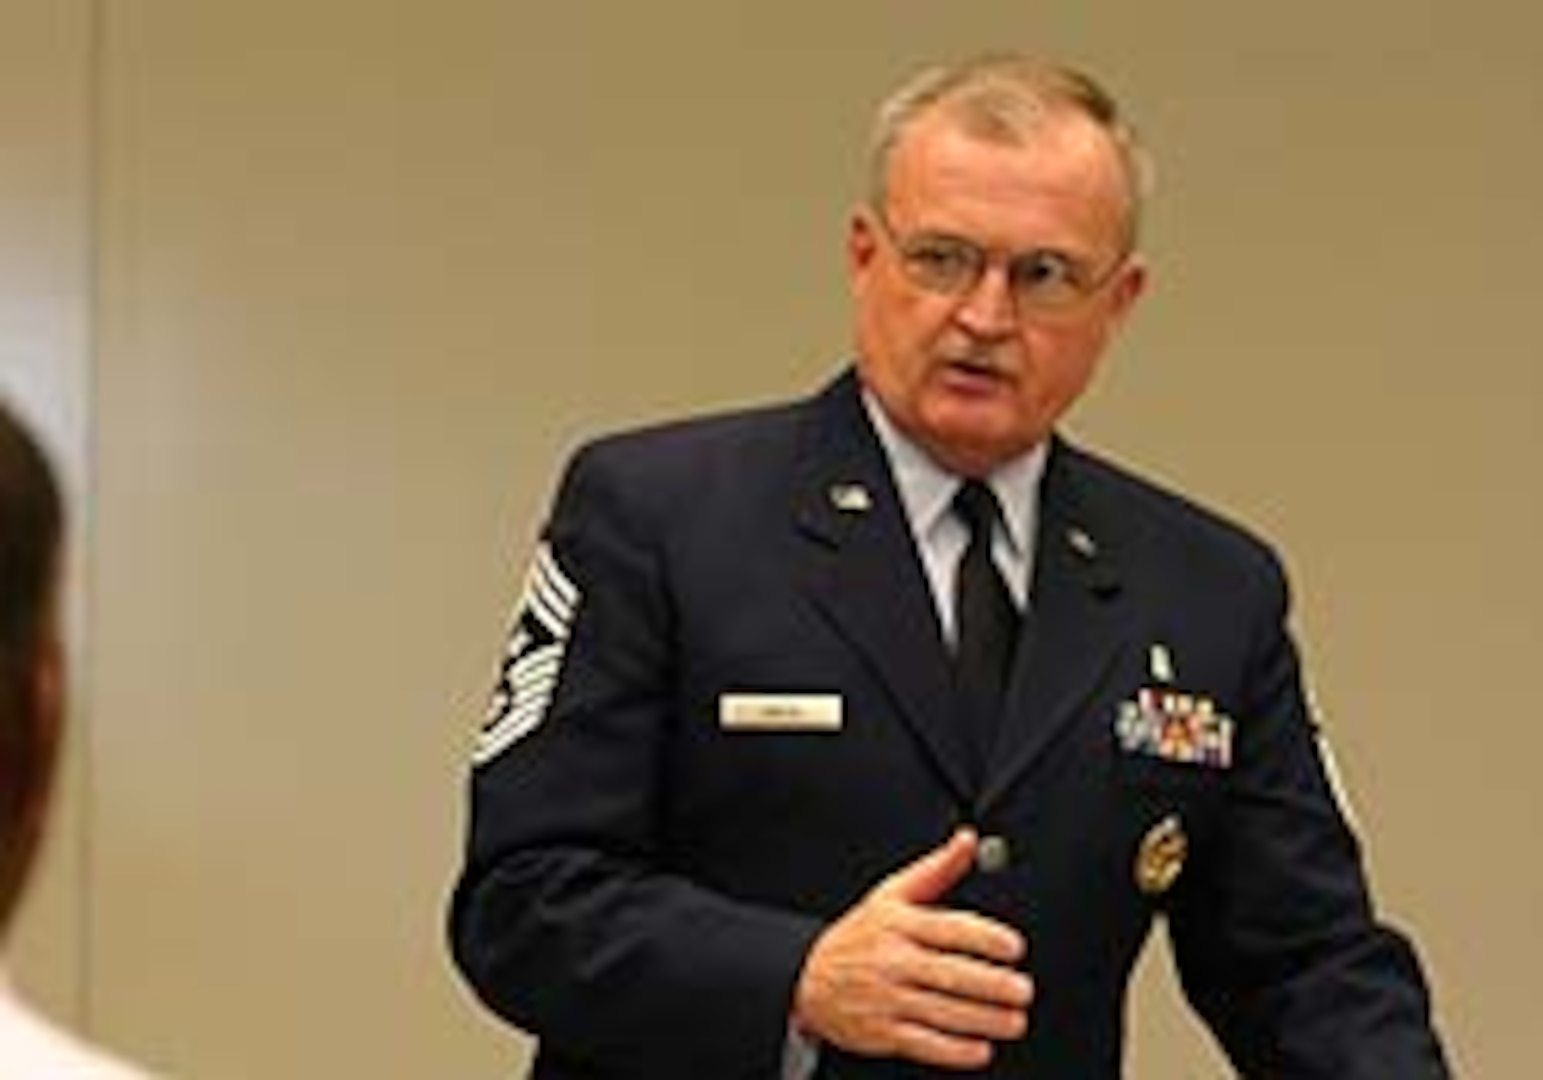 Chief Master Sgt. Richard Smith, the Air National Guard command chief master sergeant visits with the senior Air Guard enlisted leaders, first sergeants, select senior and junior NCOs and Airmen at the 5th Annual Enlisted Symposium on Oct. 21, in Bismarck, Ark.